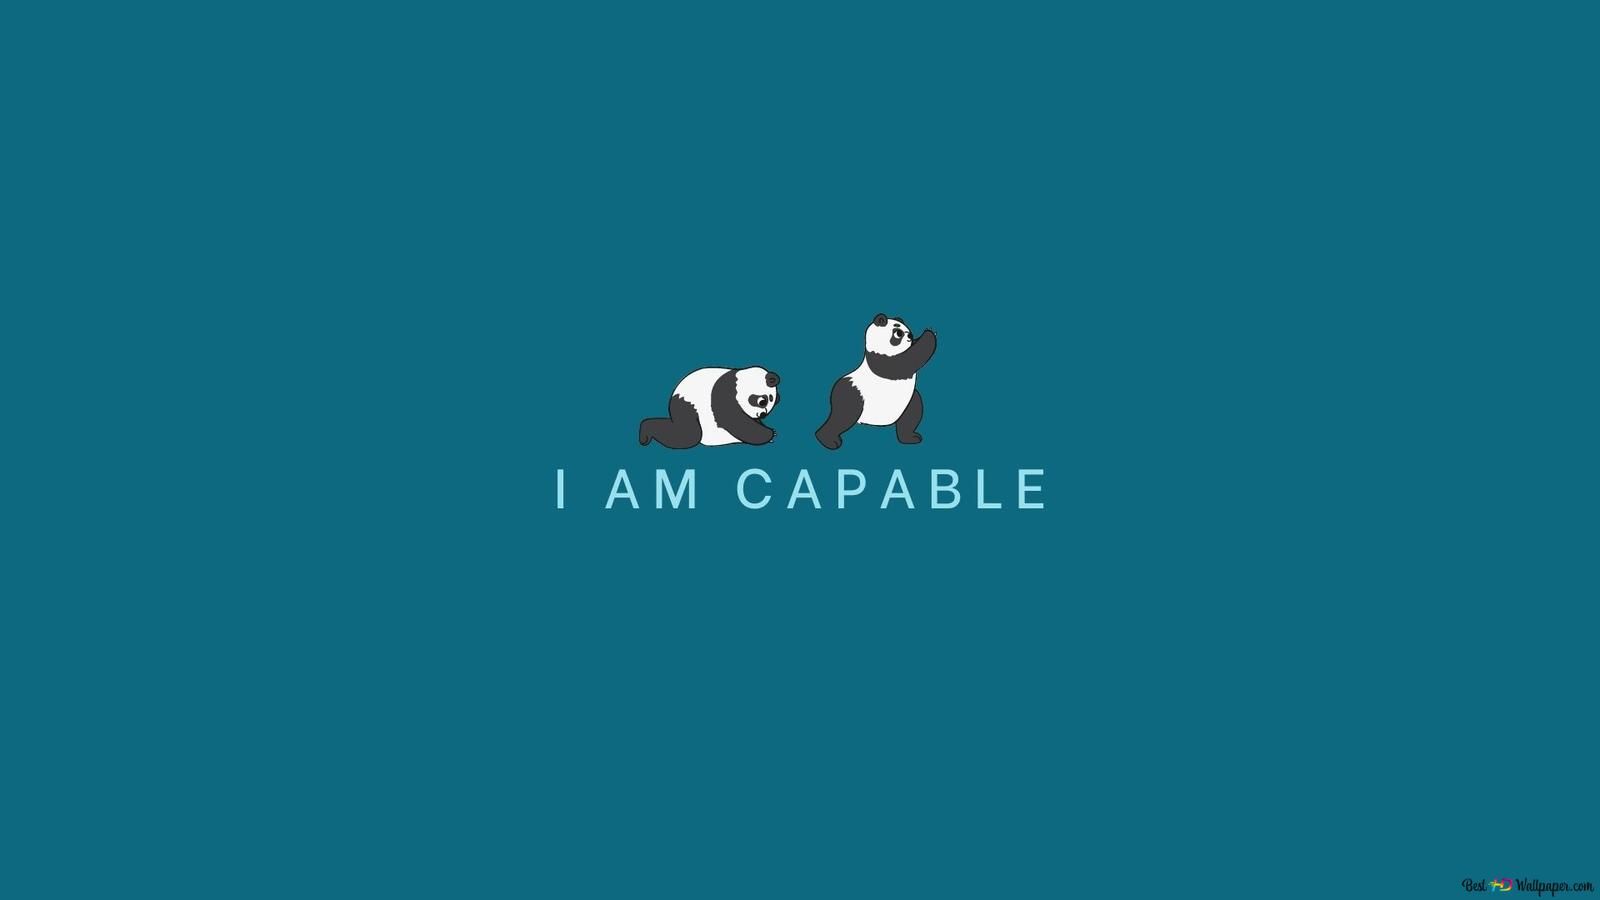 I am capable wallpaper for laptop - Minimalist